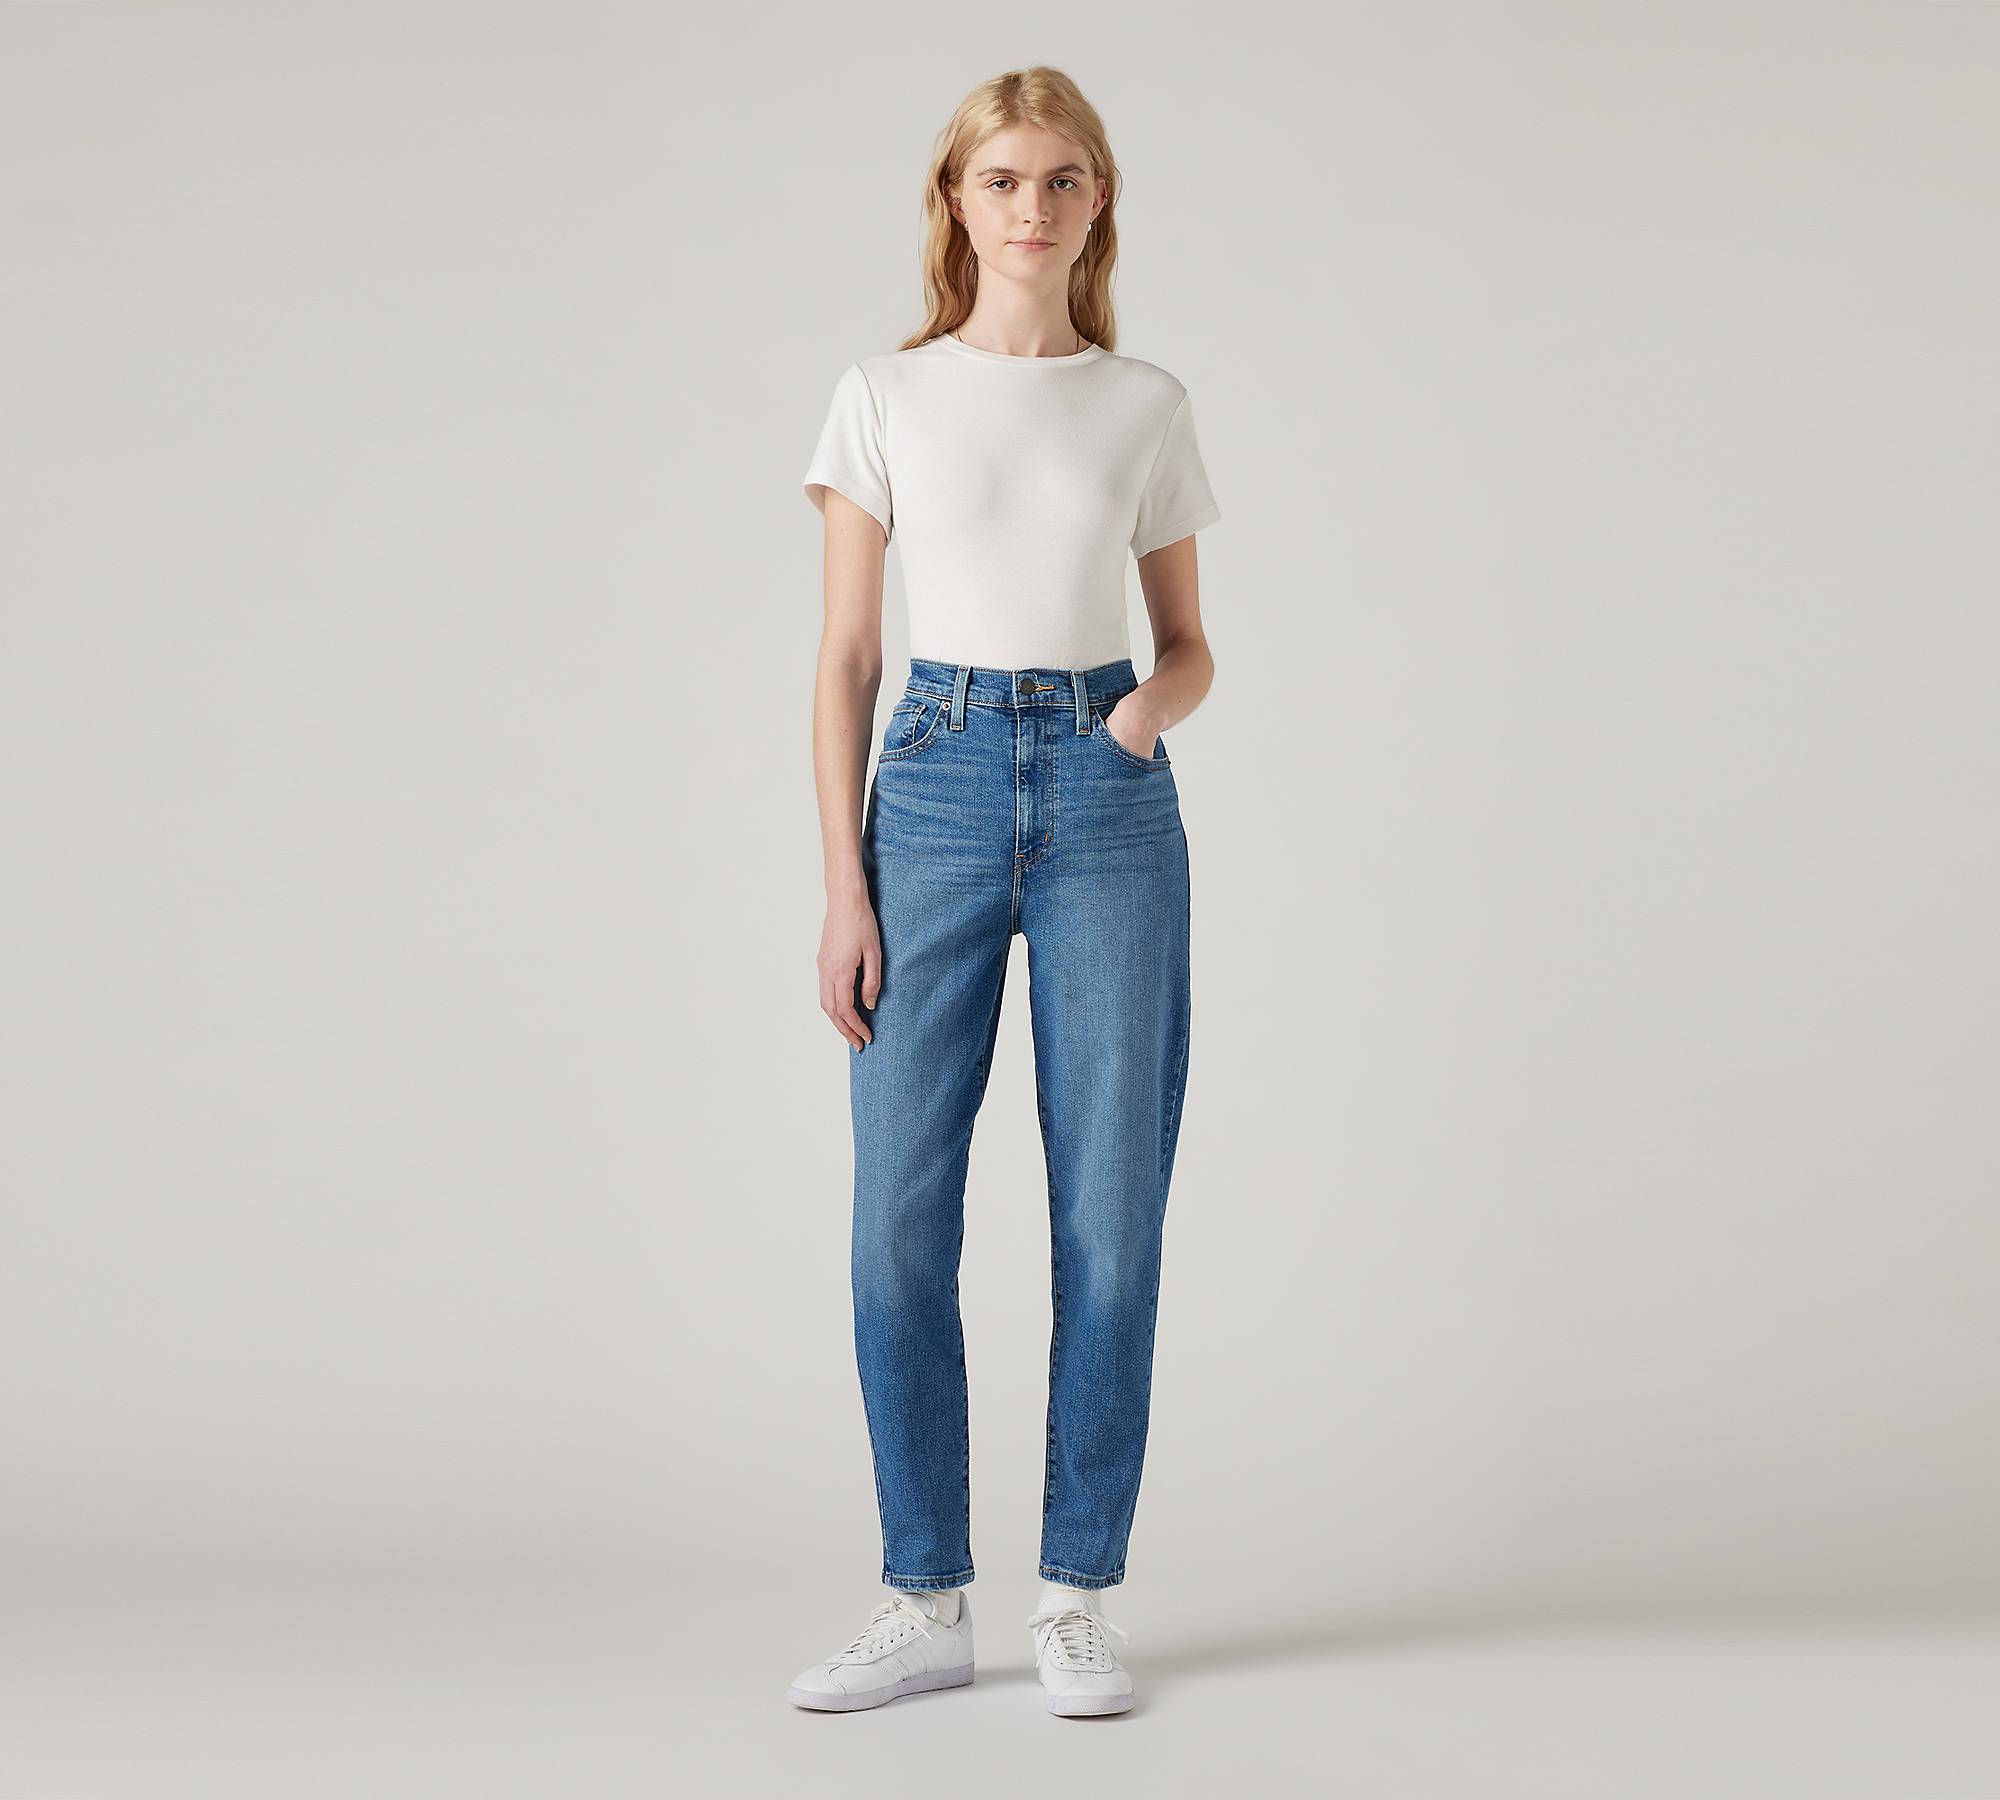 Levi's, Jeans, Levis Womens High Waisted Mom Jeans